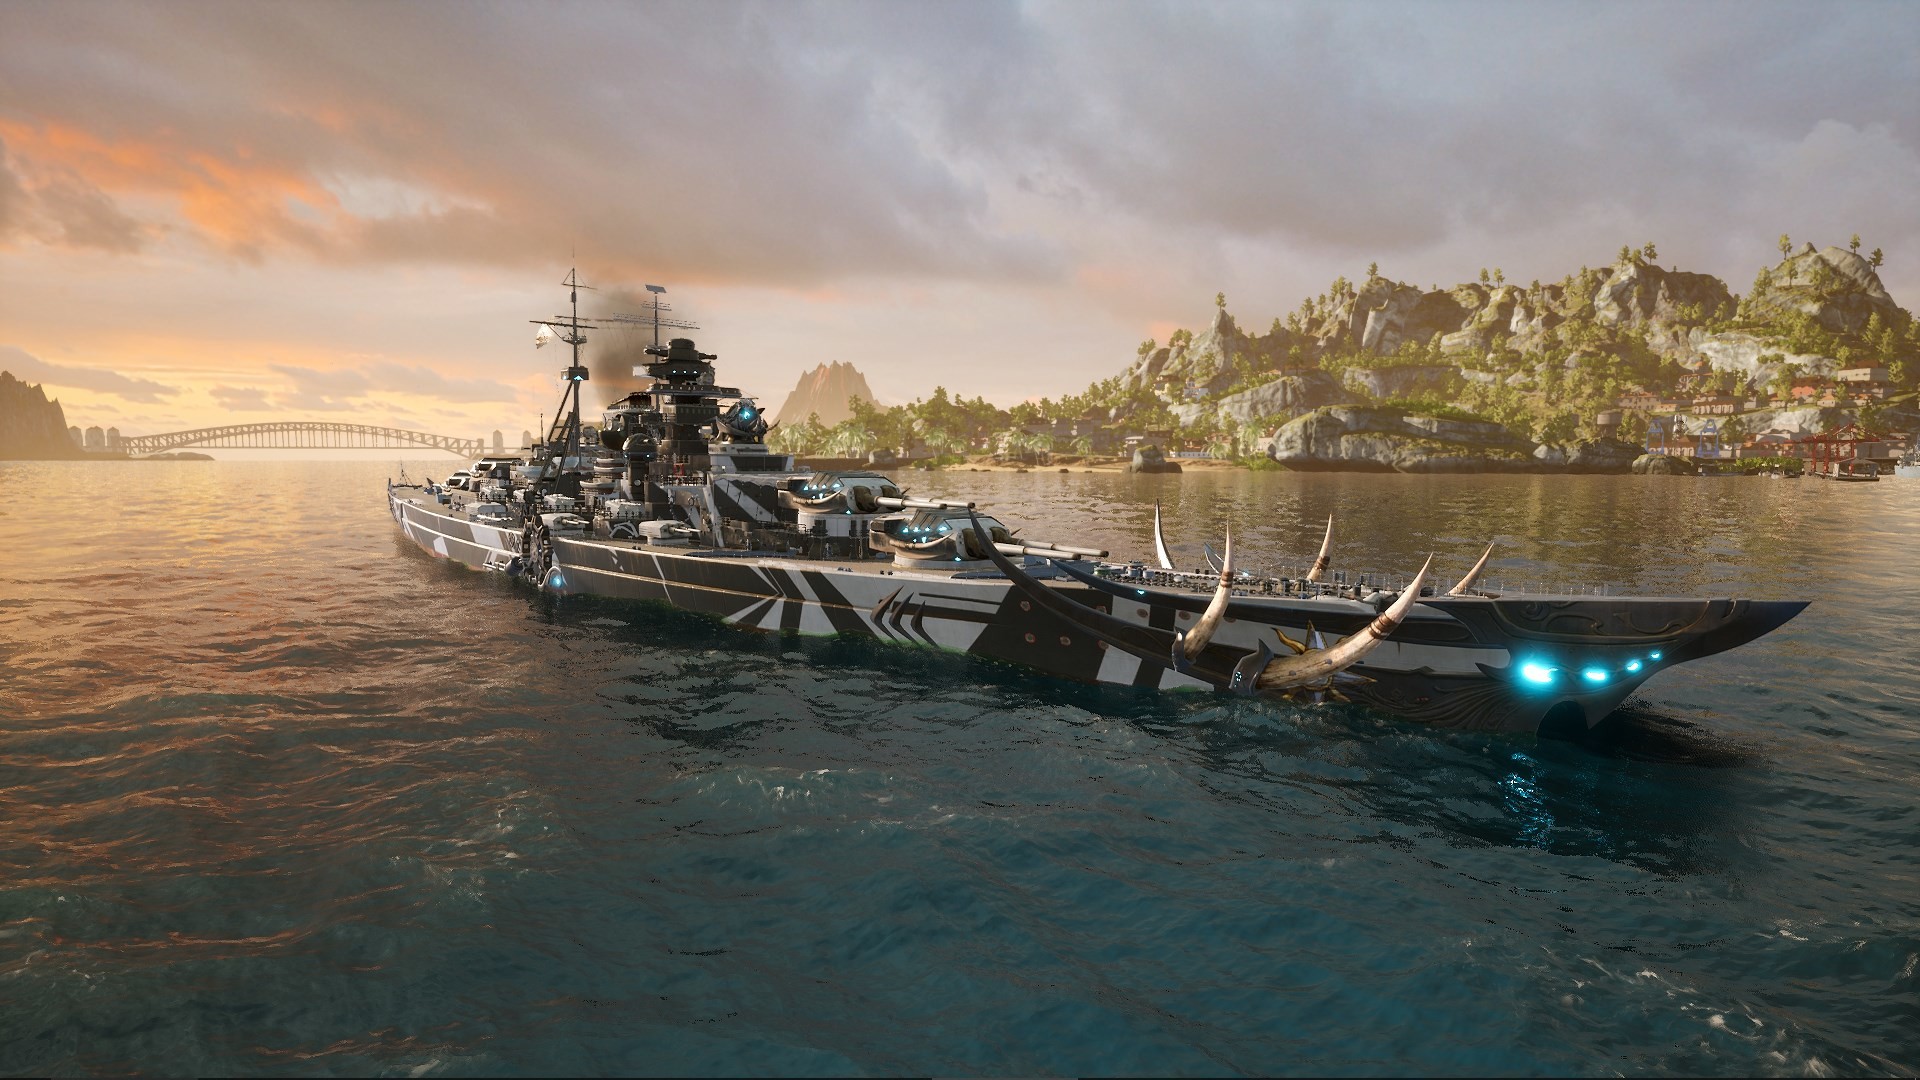 download the last version for windows Super Warship